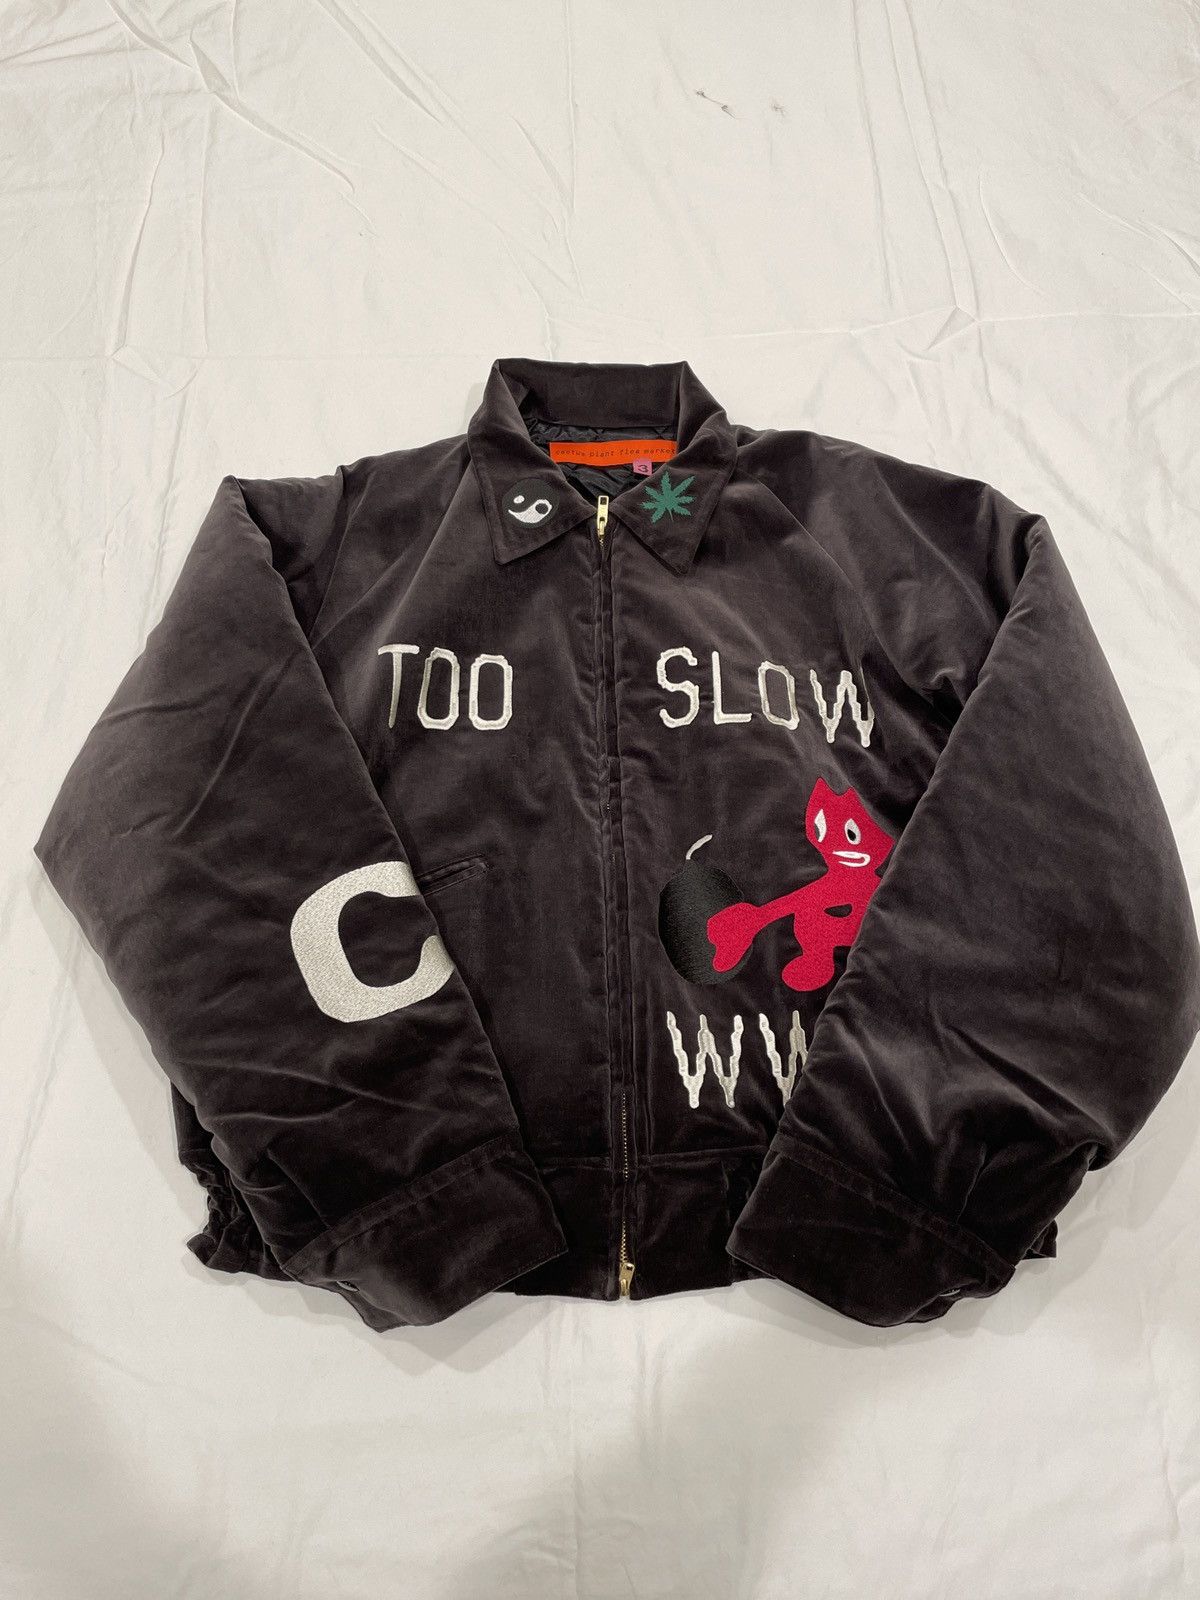 Human Made CPFM Japan Made Too Slow Souvenir Jacket | Grailed